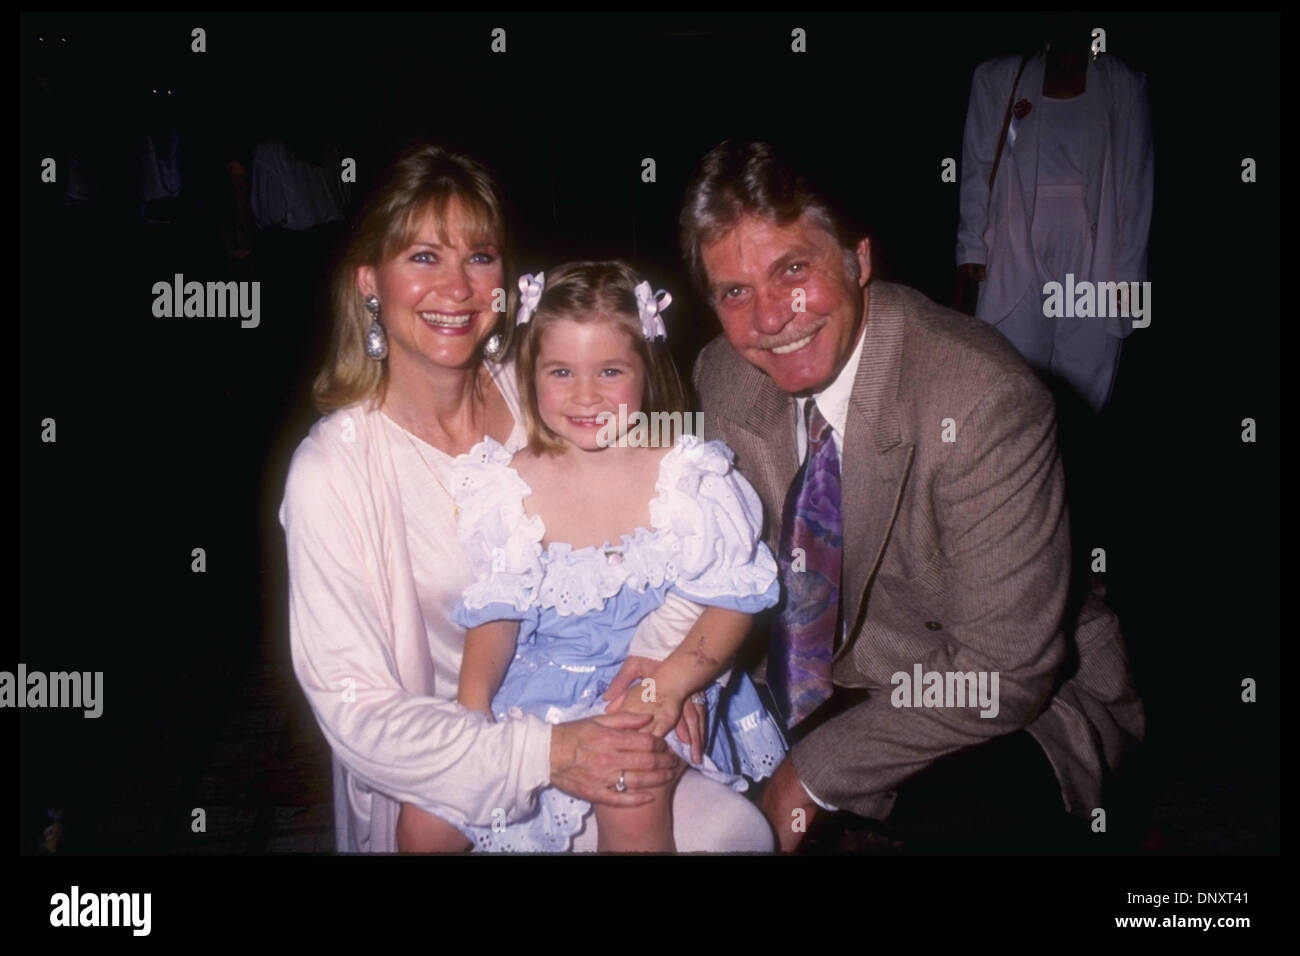 Hollywood, CA, US; DEE WALLACE STONE,husband CHRISTOPHER STONE and daughter GABBY STONE attend M.A.D.D. Mother's Day Luncheon in this undated photo.   Mandatory Credit: Kathy Hutchins/ZUMA Press. (©) Kathy Hutchins Stock Photo